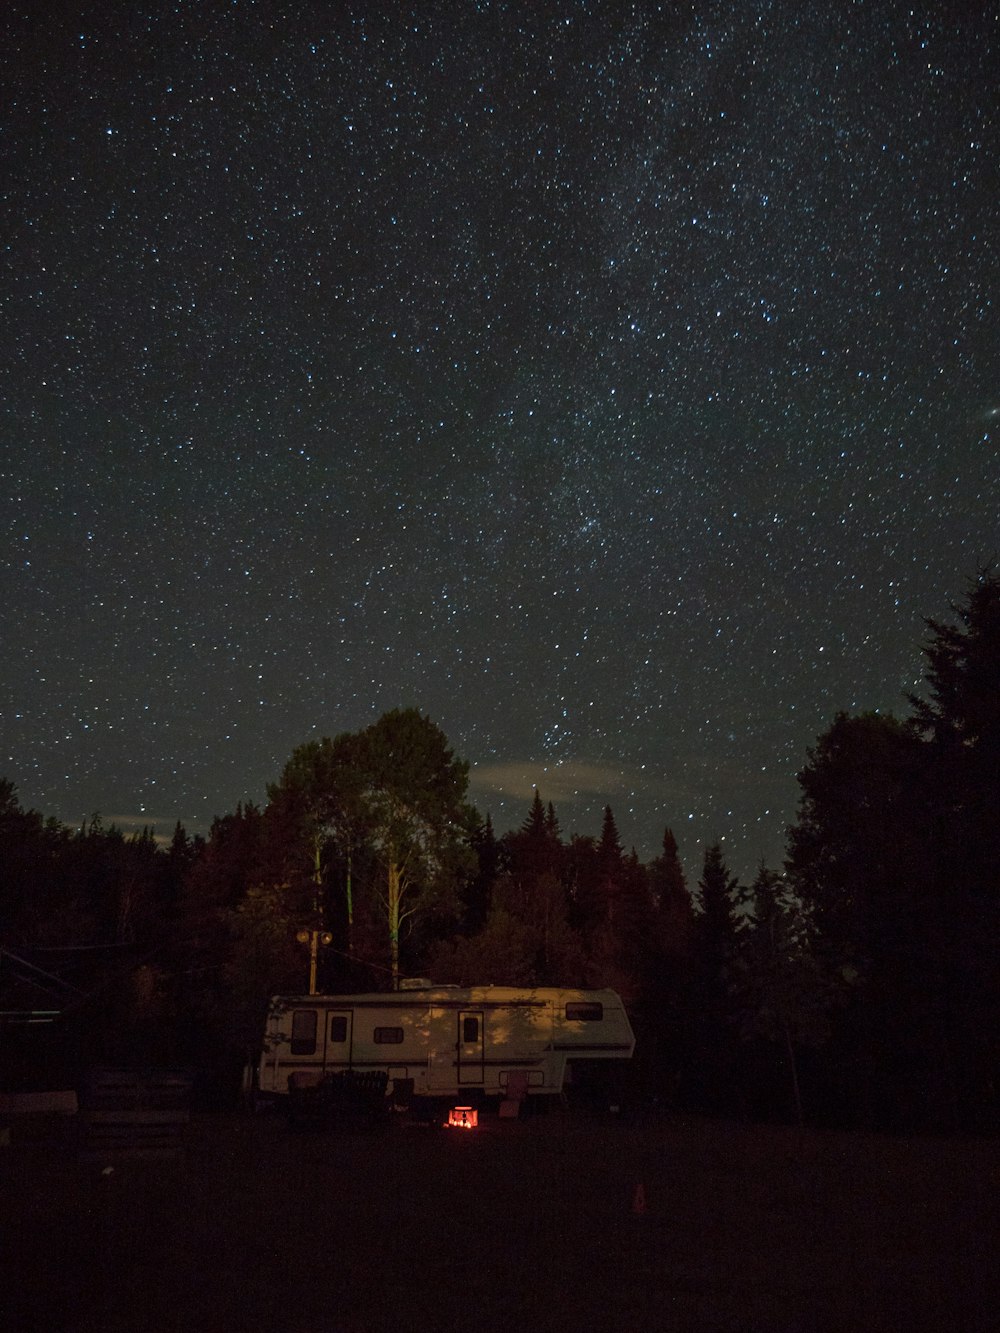 white RV trailer surrounded by trees during nighttime